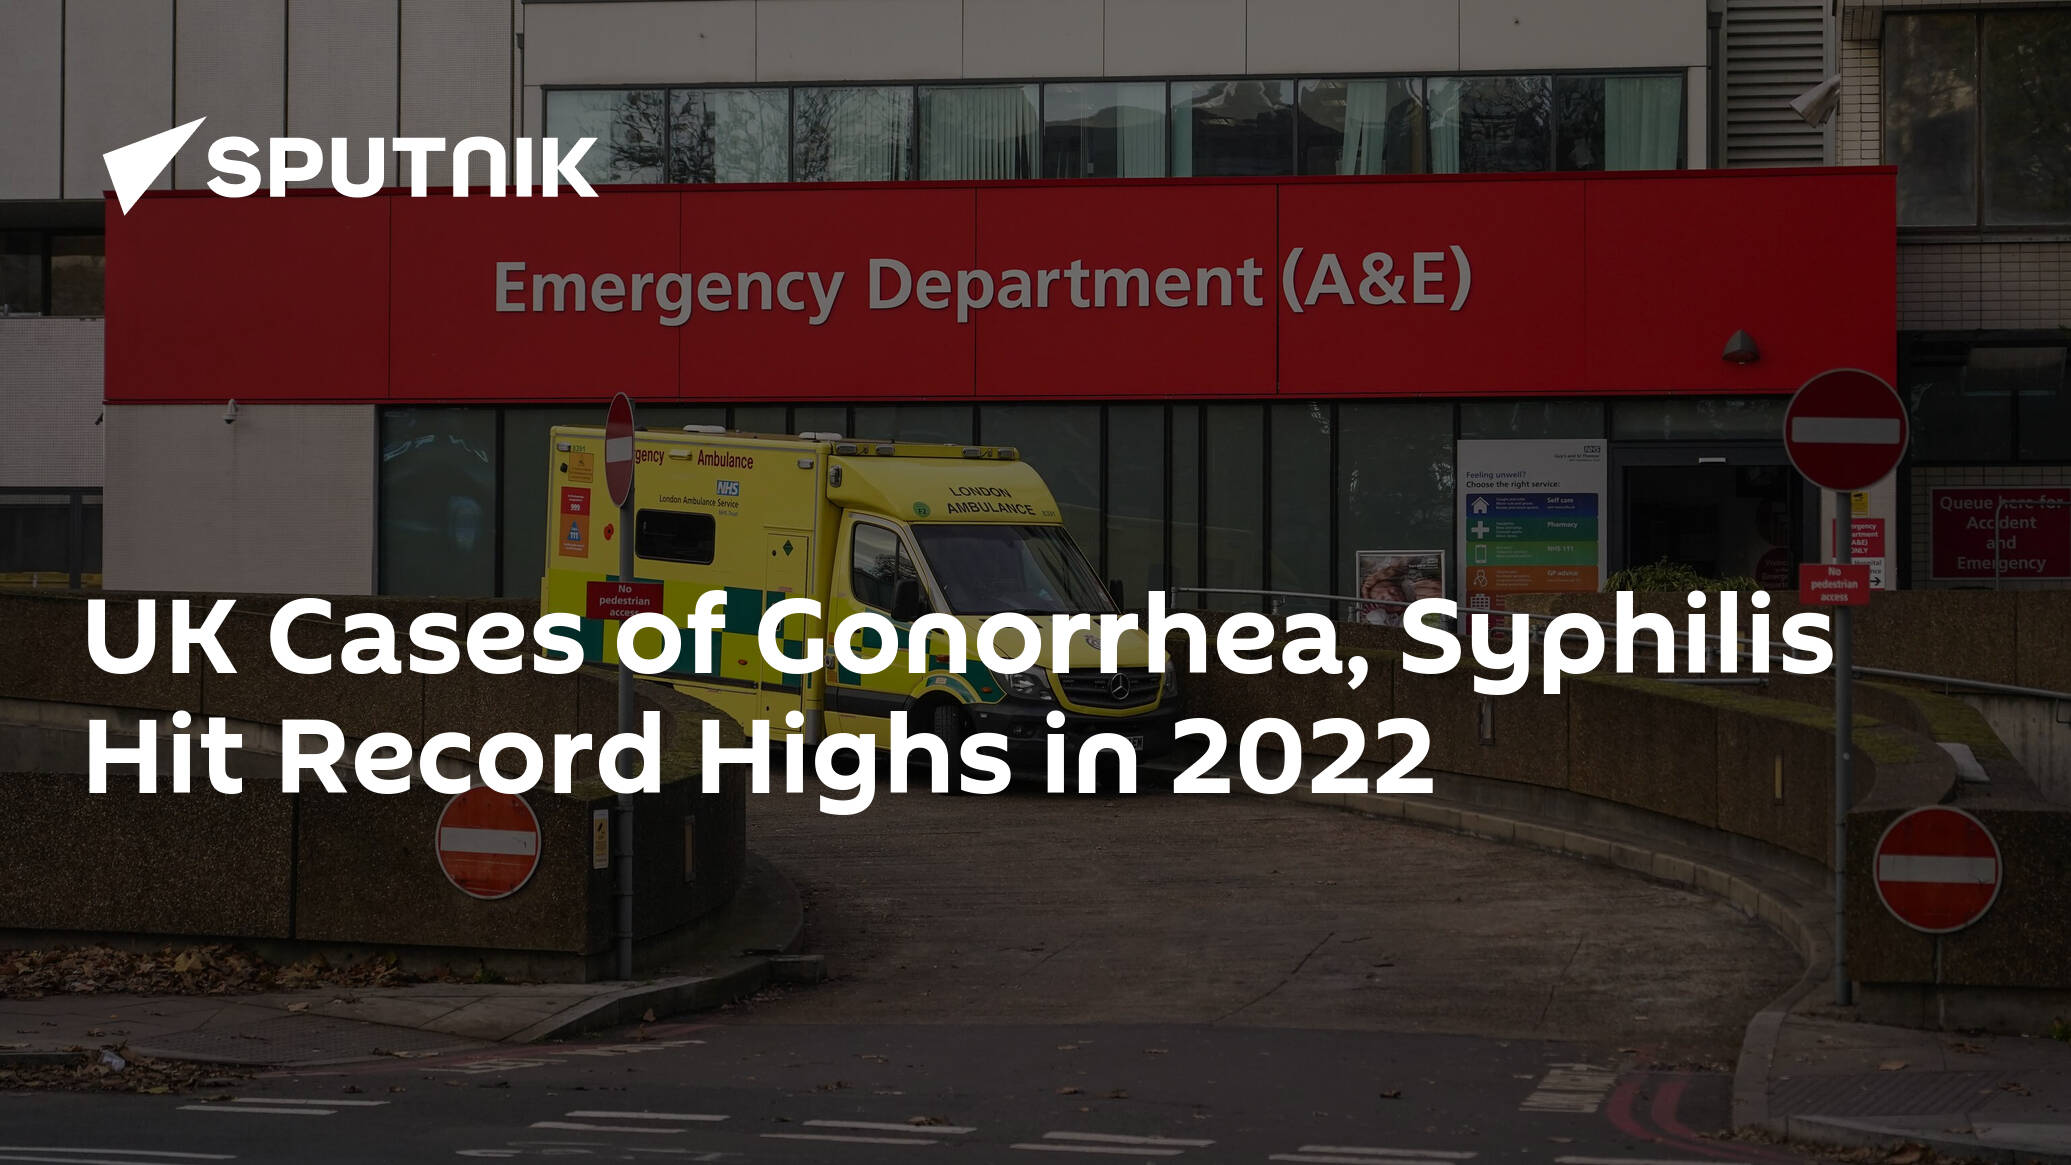 UK Cases of Gonorrhea, Syphilis Hit Record Highs in 2022